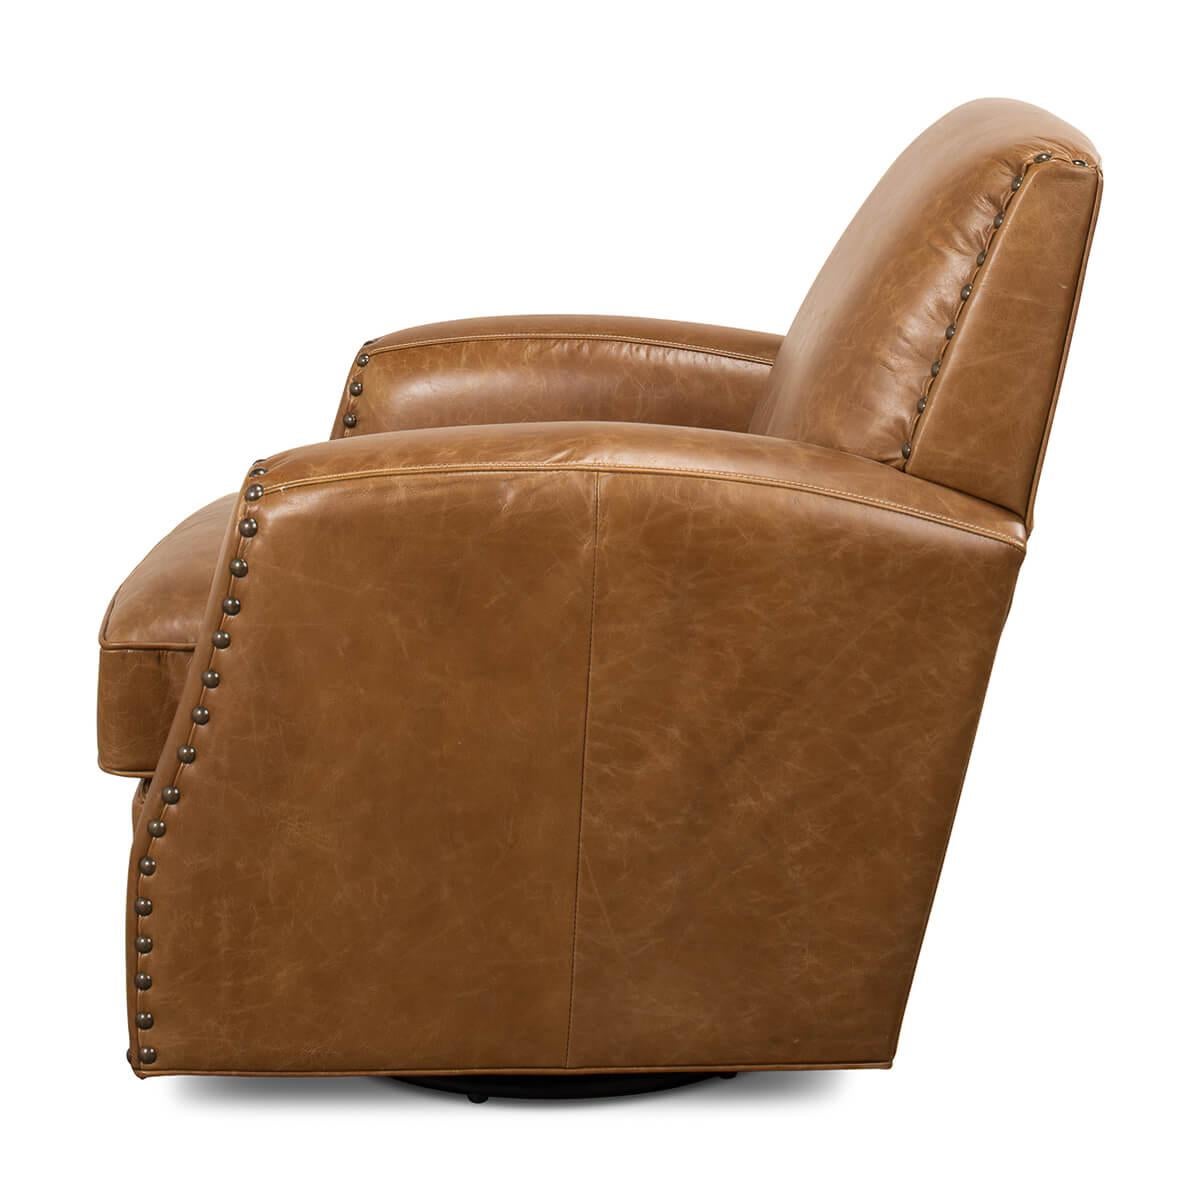 classic leather armchair